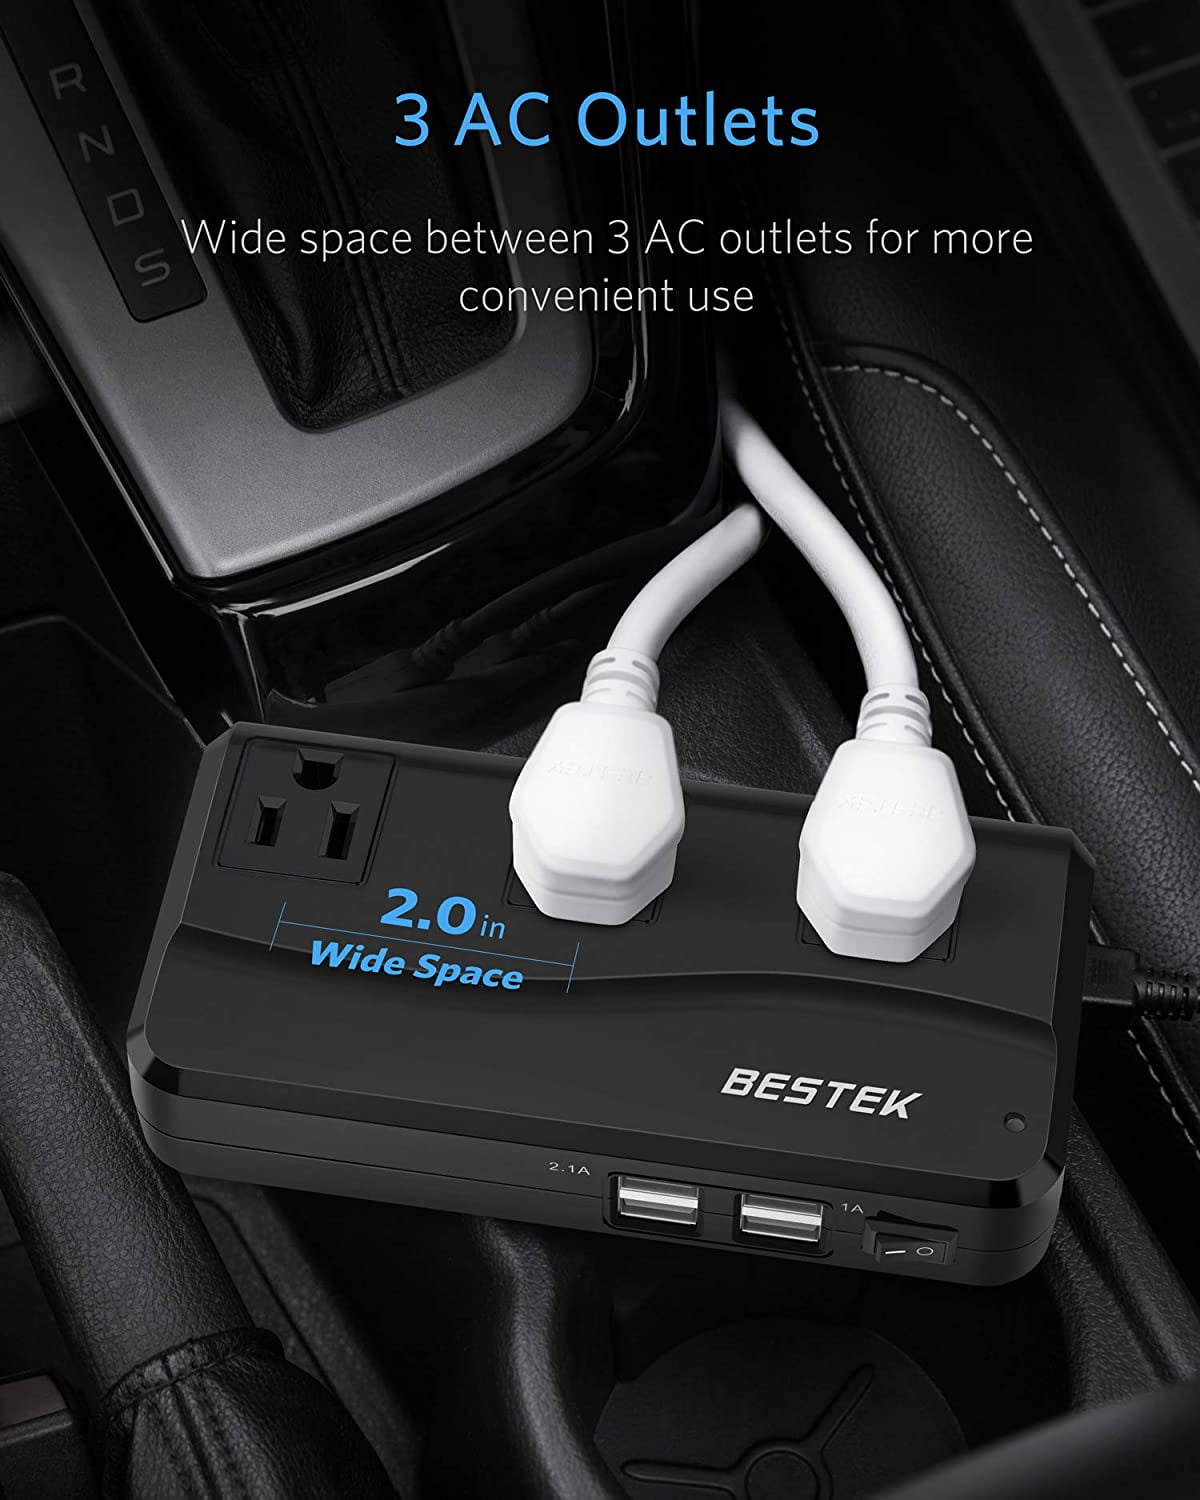 200W Car Power Inverter IABOLT DC 12V to AC 110V Converter for Car with USB Ports Car Charger Adapter AC Outlets 